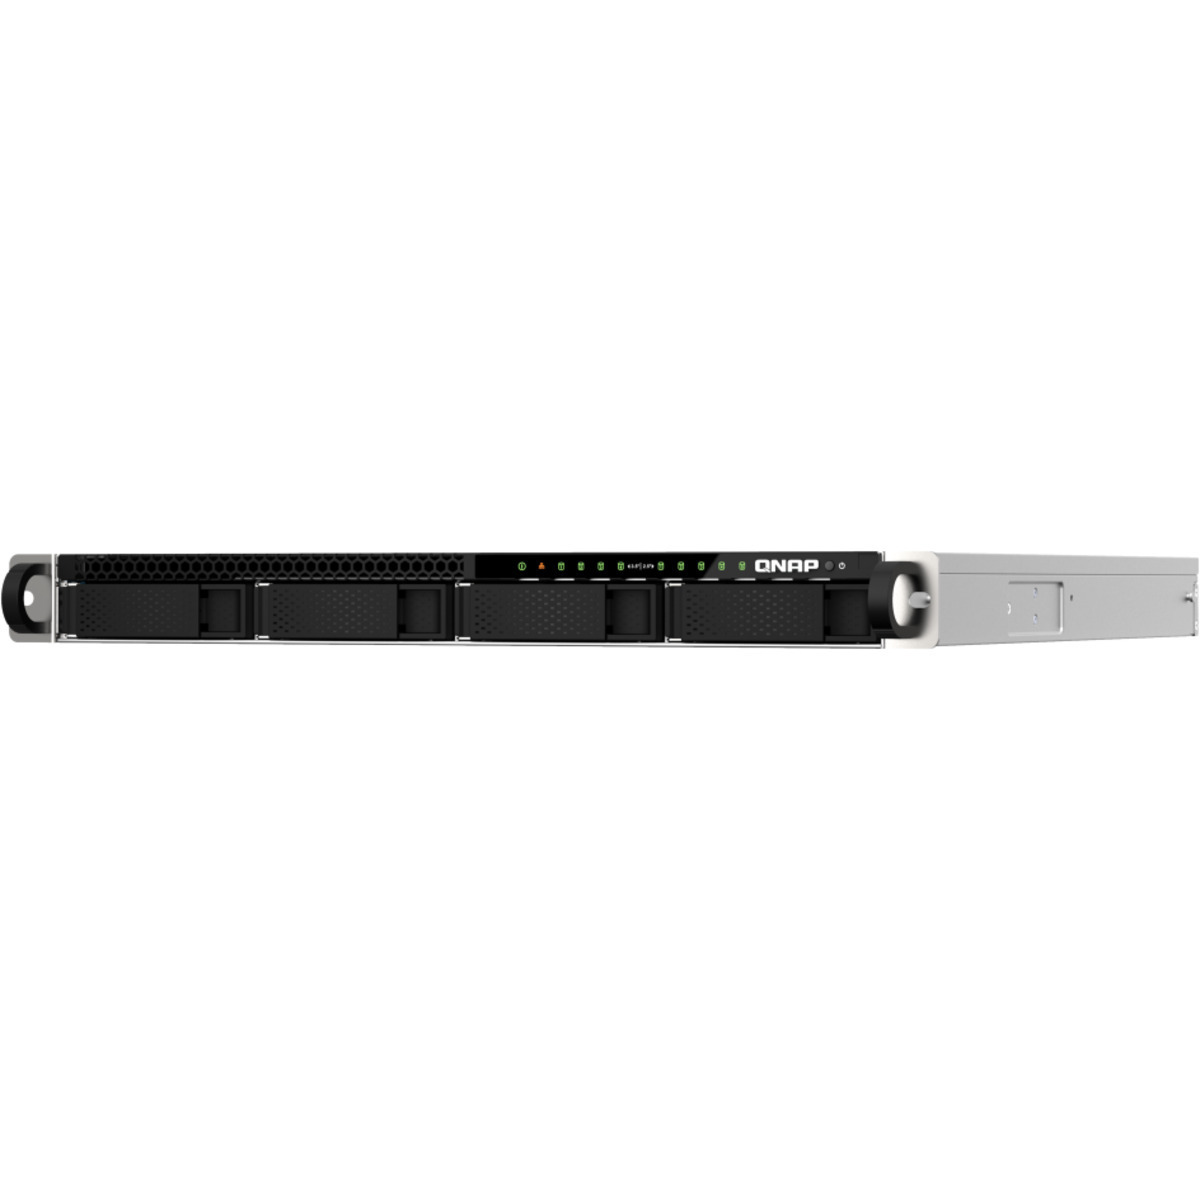 buy $4007 QNAP TS-h987XU-RP QuTS hero Edition 16tb RackMount NAS - Network Attached Storage Device 4x4000gb Toshiba MN Series MN08ADA400E 3.5 7200rpm SATA 6Gb/s HDD NAS Class Drives Installed - Burn-In Tested - ON SALE - nas headquarters buy network attached storage server device das new raid-5 free shipping simply usa TS-h987XU-RP QuTS hero Edition